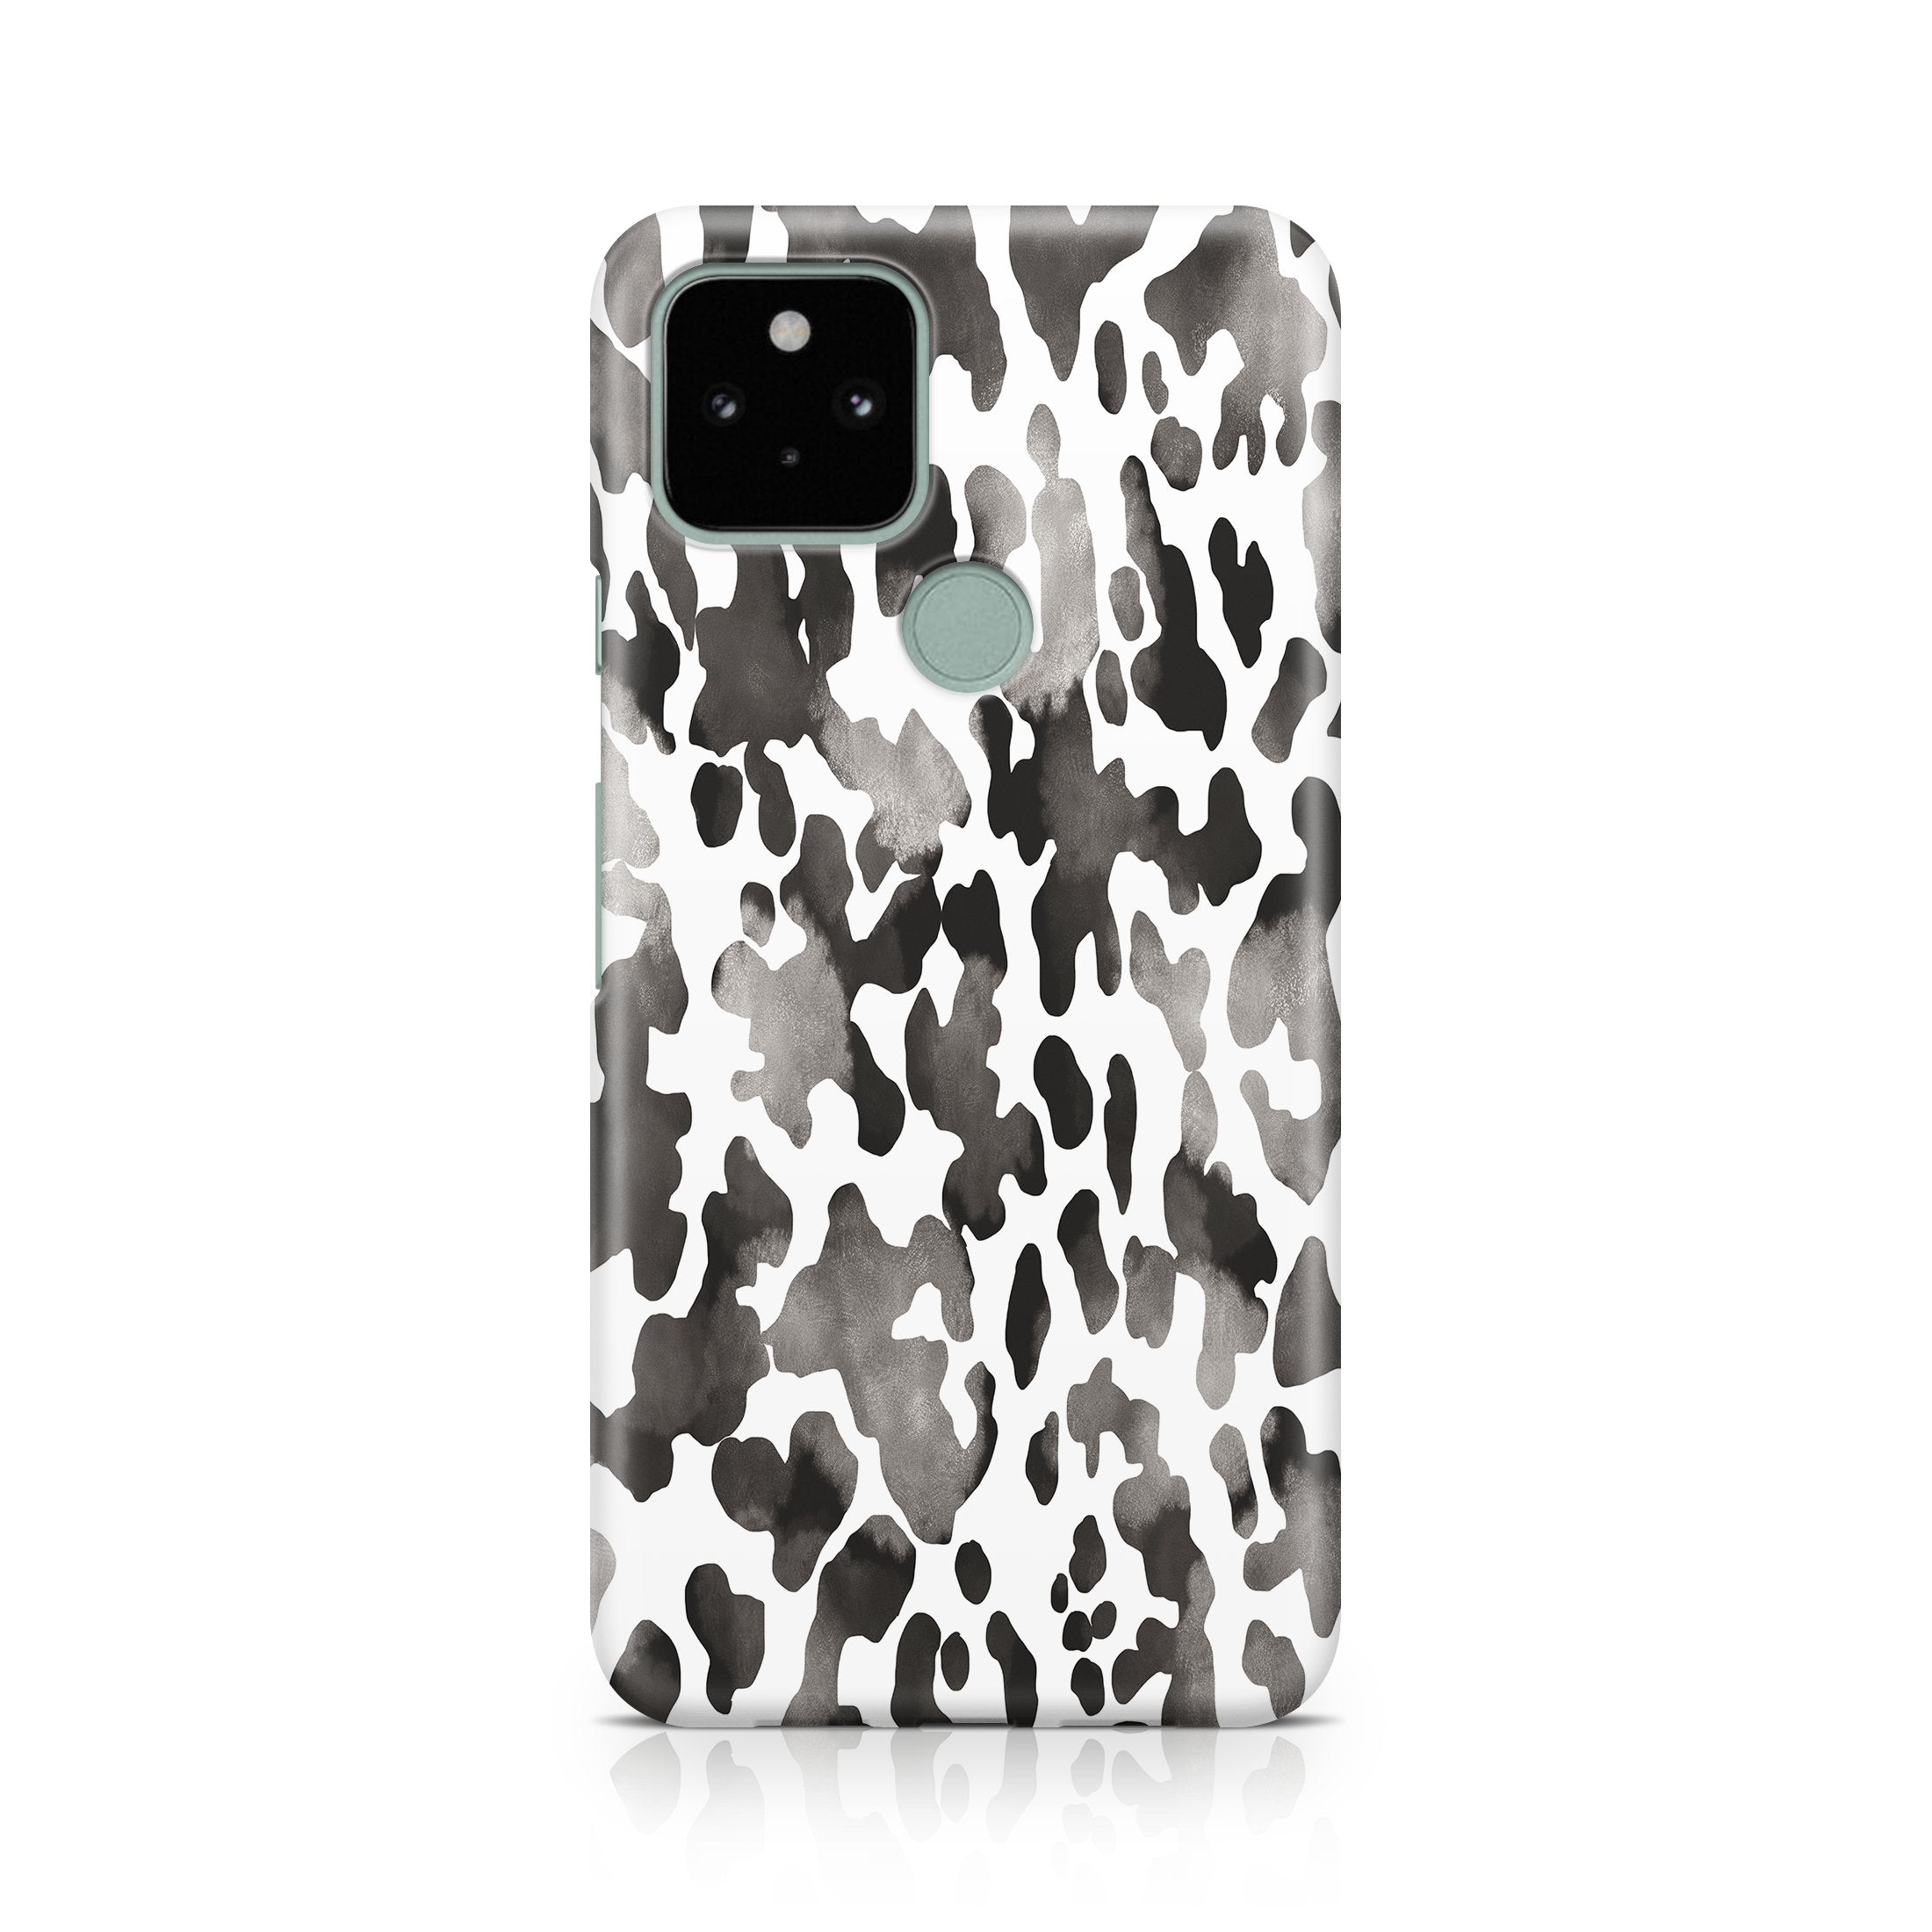 Animal Print II - Google phone case designs by CaseSwagger